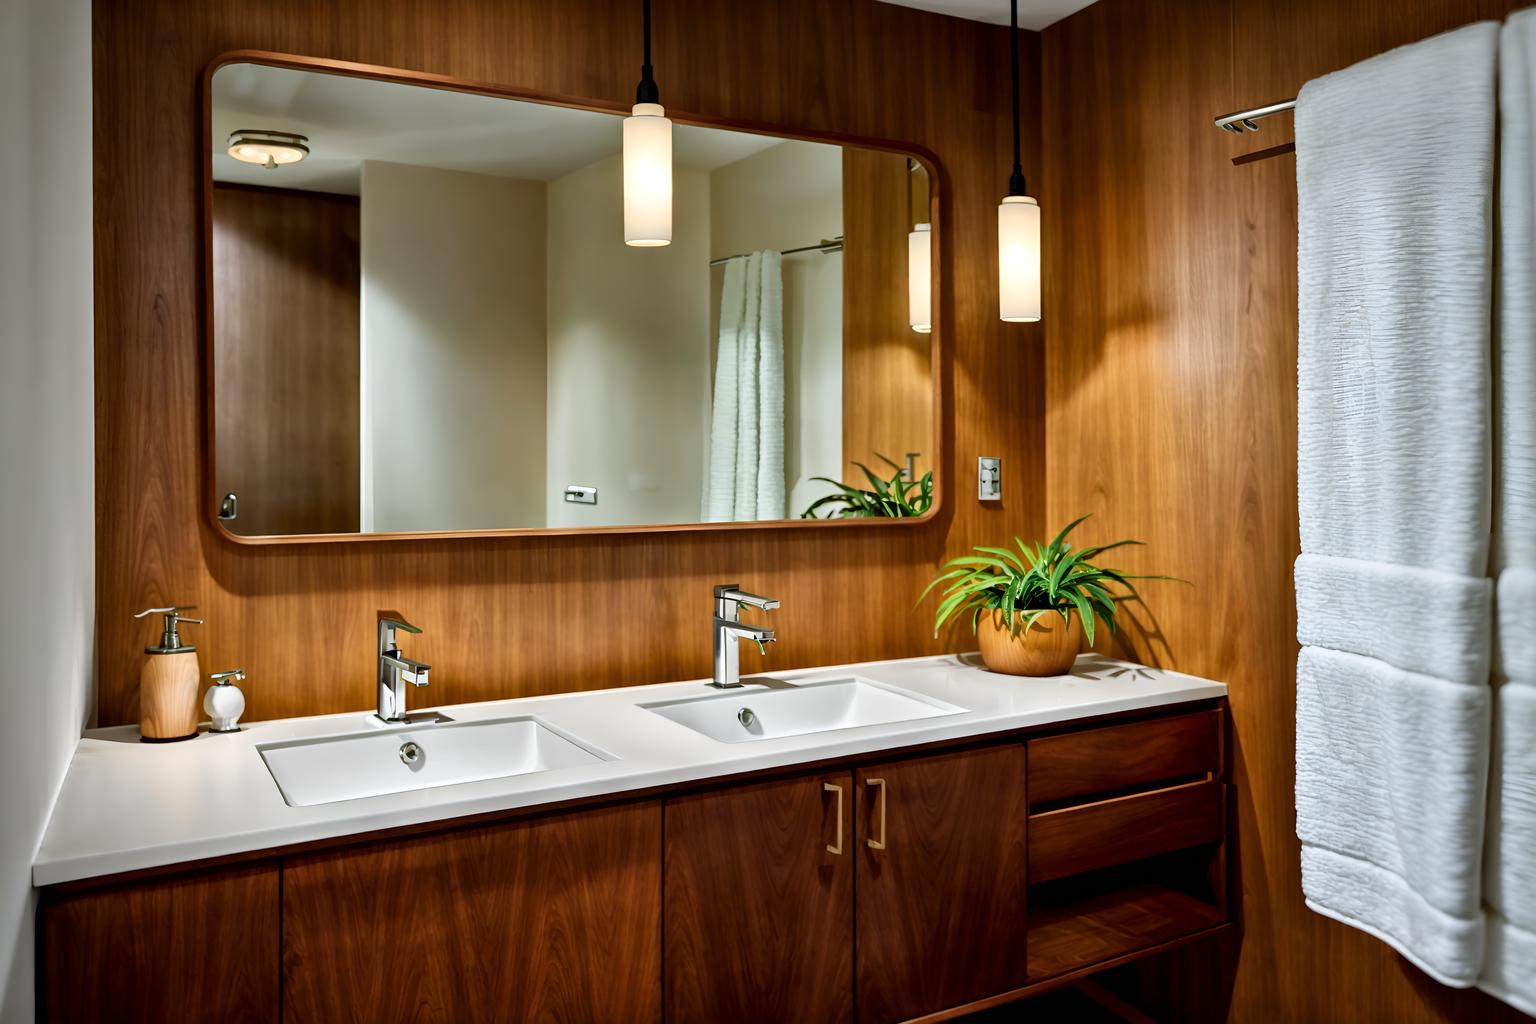 midcentury modern-style (hotel bathroom interior) with bathroom sink with faucet and bath towel and bathroom cabinet and mirror and plant and toilet seat and waste basket and bathtub. . with minimalist and function over form and nature indoors and wood pendant light mid century modern chandelier and mid century modern mobile chandelier and vibrant colors and muted tones and natural and manmade materials. . cinematic photo, highly detailed, cinematic lighting, ultra-detailed, ultrarealistic, photorealism, 8k. midcentury modern interior design style. masterpiece, cinematic light, ultrarealistic+, photorealistic+, 8k, raw photo, realistic, sharp focus on eyes, (symmetrical eyes), (intact eyes), hyperrealistic, highest quality, best quality, , highly detailed, masterpiece, best quality, extremely detailed 8k wallpaper, masterpiece, best quality, ultra-detailed, best shadow, detailed background, detailed face, detailed eyes, high contrast, best illumination, detailed face, dulux, caustic, dynamic angle, detailed glow. dramatic lighting. highly detailed, insanely detailed hair, symmetrical, intricate details, professionally retouched, 8k high definition. strong bokeh. award winning photo.